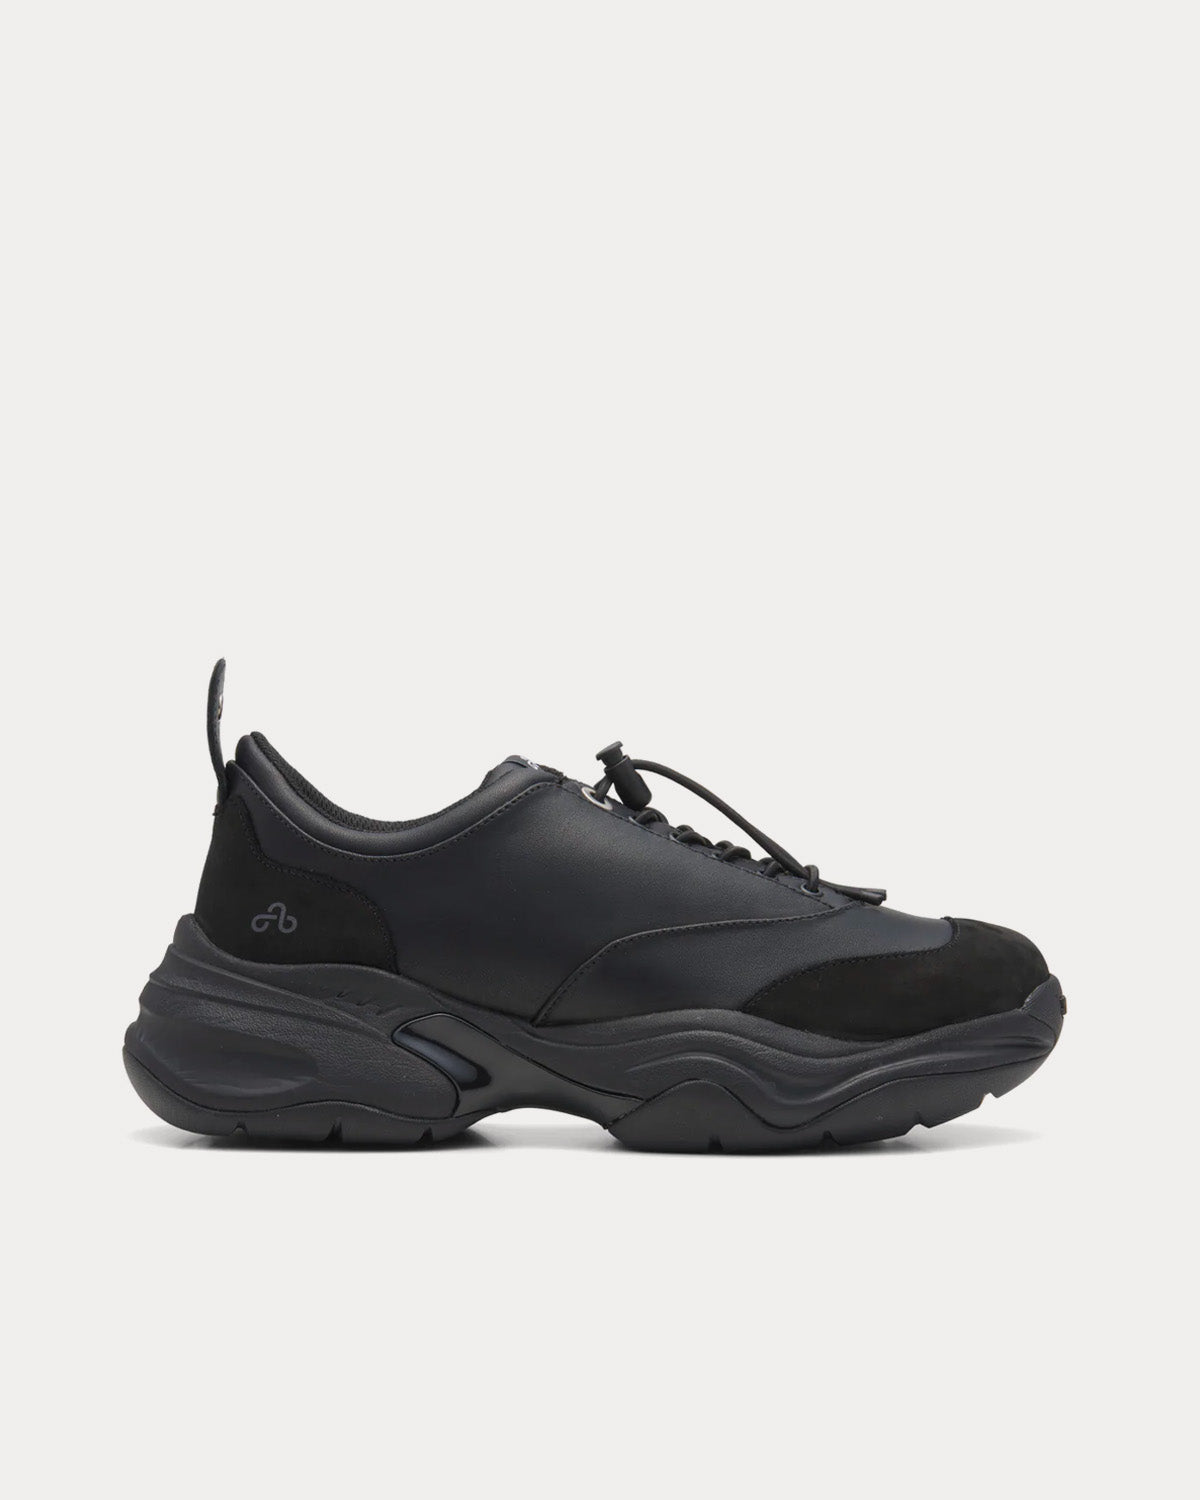 OAO The Curve 1 Black / White Low Top Sneakers - Sneak in Peace